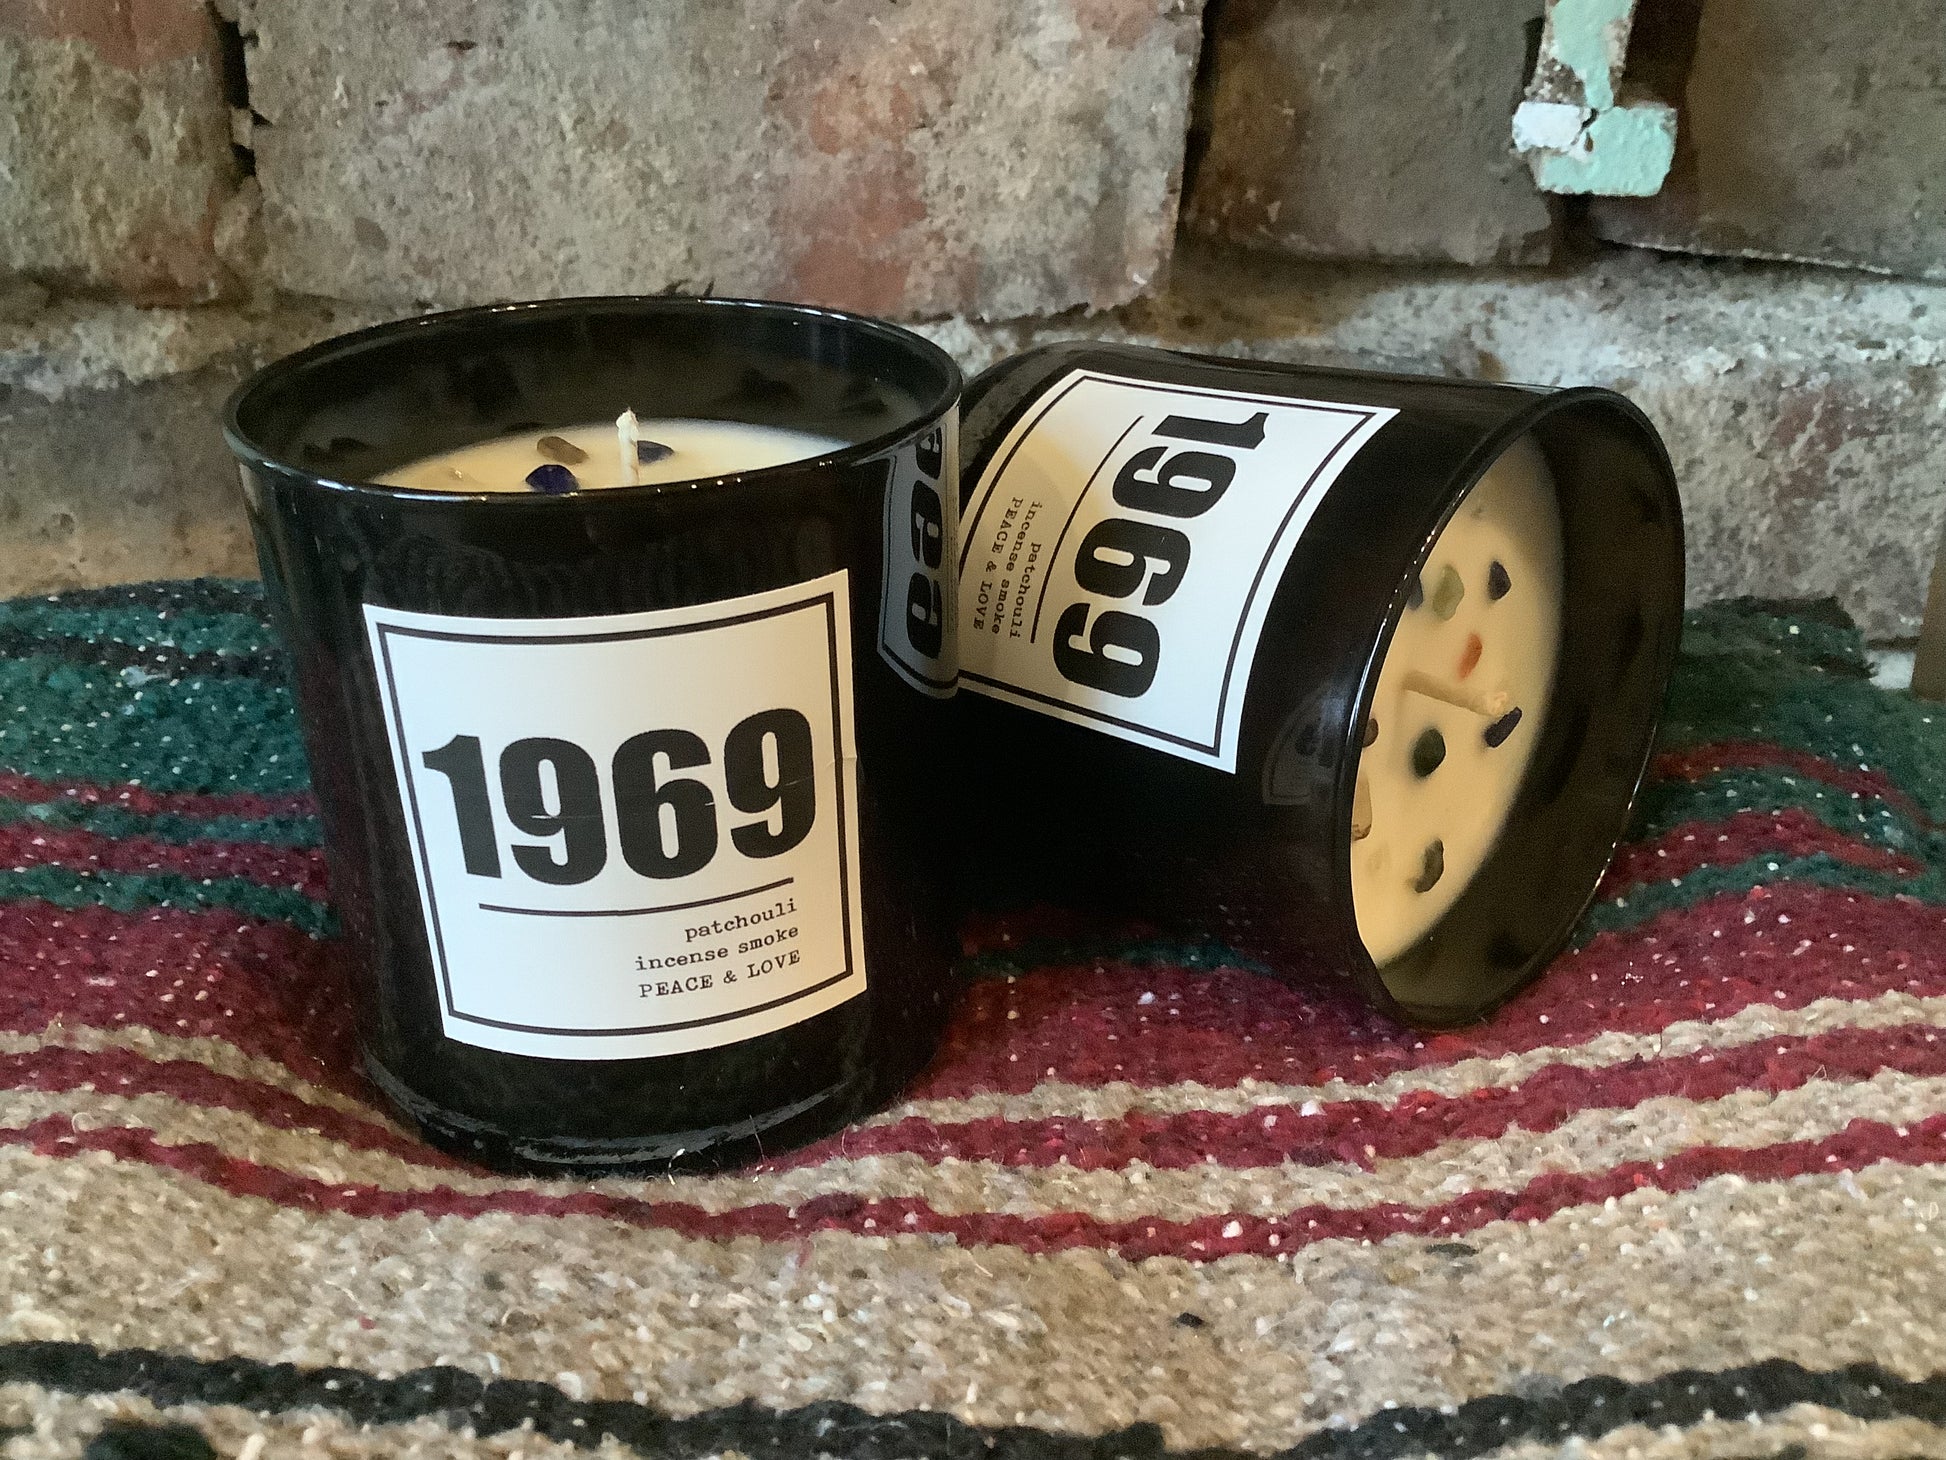 1969 candles